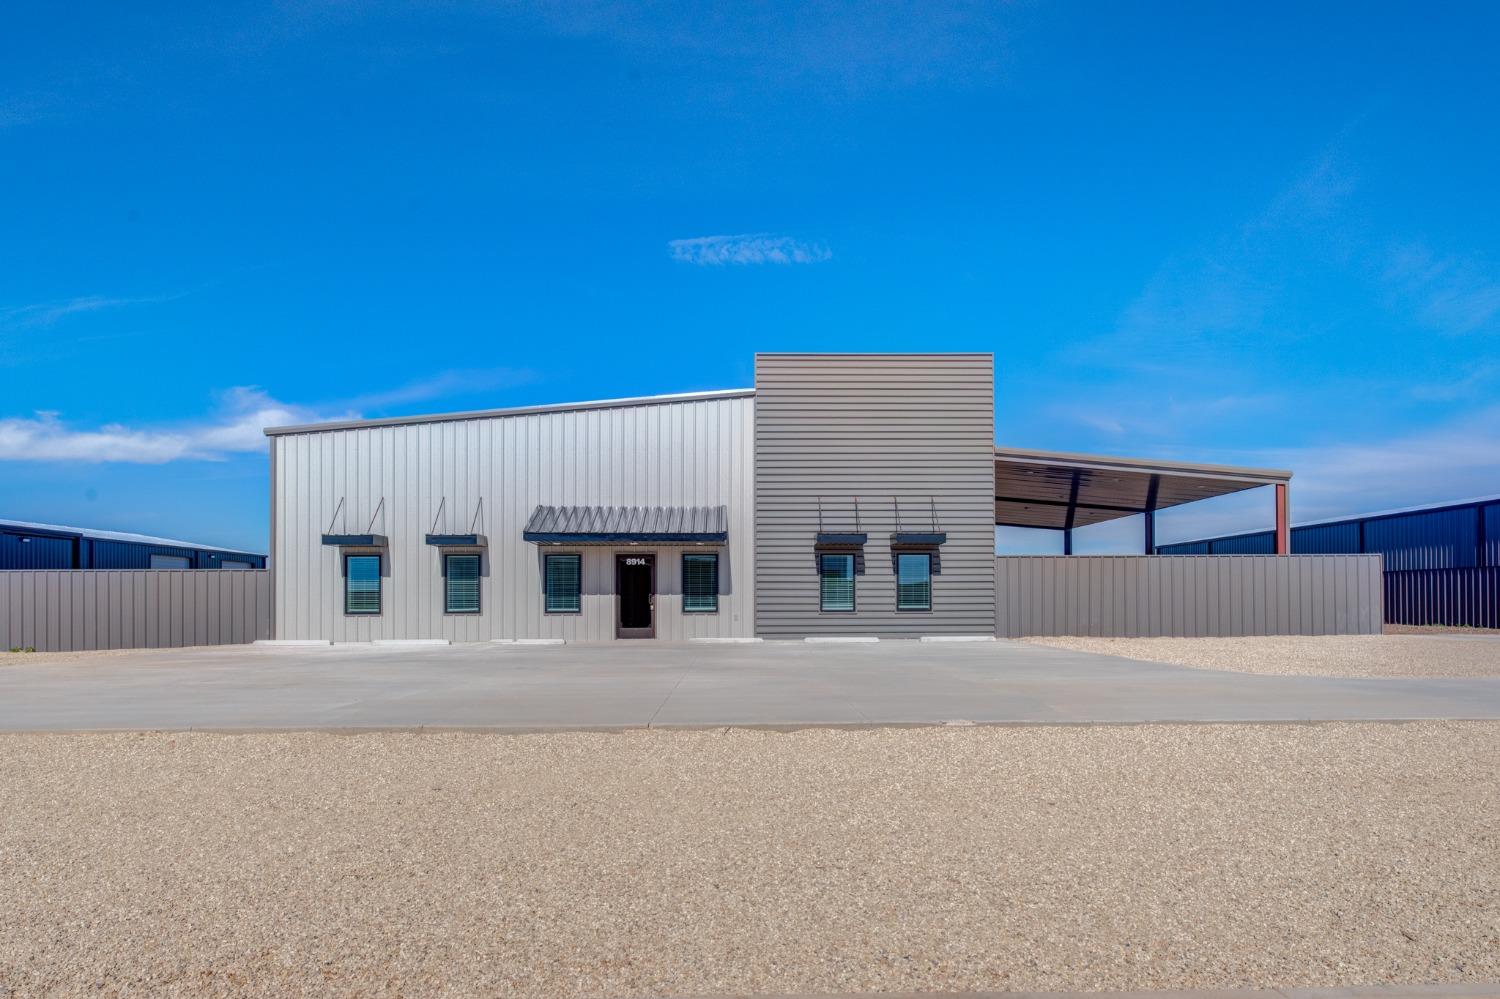 9,000 sq ft new construction steel building on a 1 acre lot in Inler Business Park. 1,812 sq ft foot of office with 7,188 sq ft of warehouse. The office space features 6 offices, a reception area, kitchen/break room, a bathroom, vinyl plank floors, and granite countertops. The warehouse is foam insulated, has two 14' overhead doors, its own restroom, and 16' ft sidewalls. The front parking will be asphalt and there will be a 7' metal fence surrounding the crushed concrete stack yard. Located out of the city limits this building has its own well and septic with SPEC electricity. Also has Atmos natural gas with gas furnace.